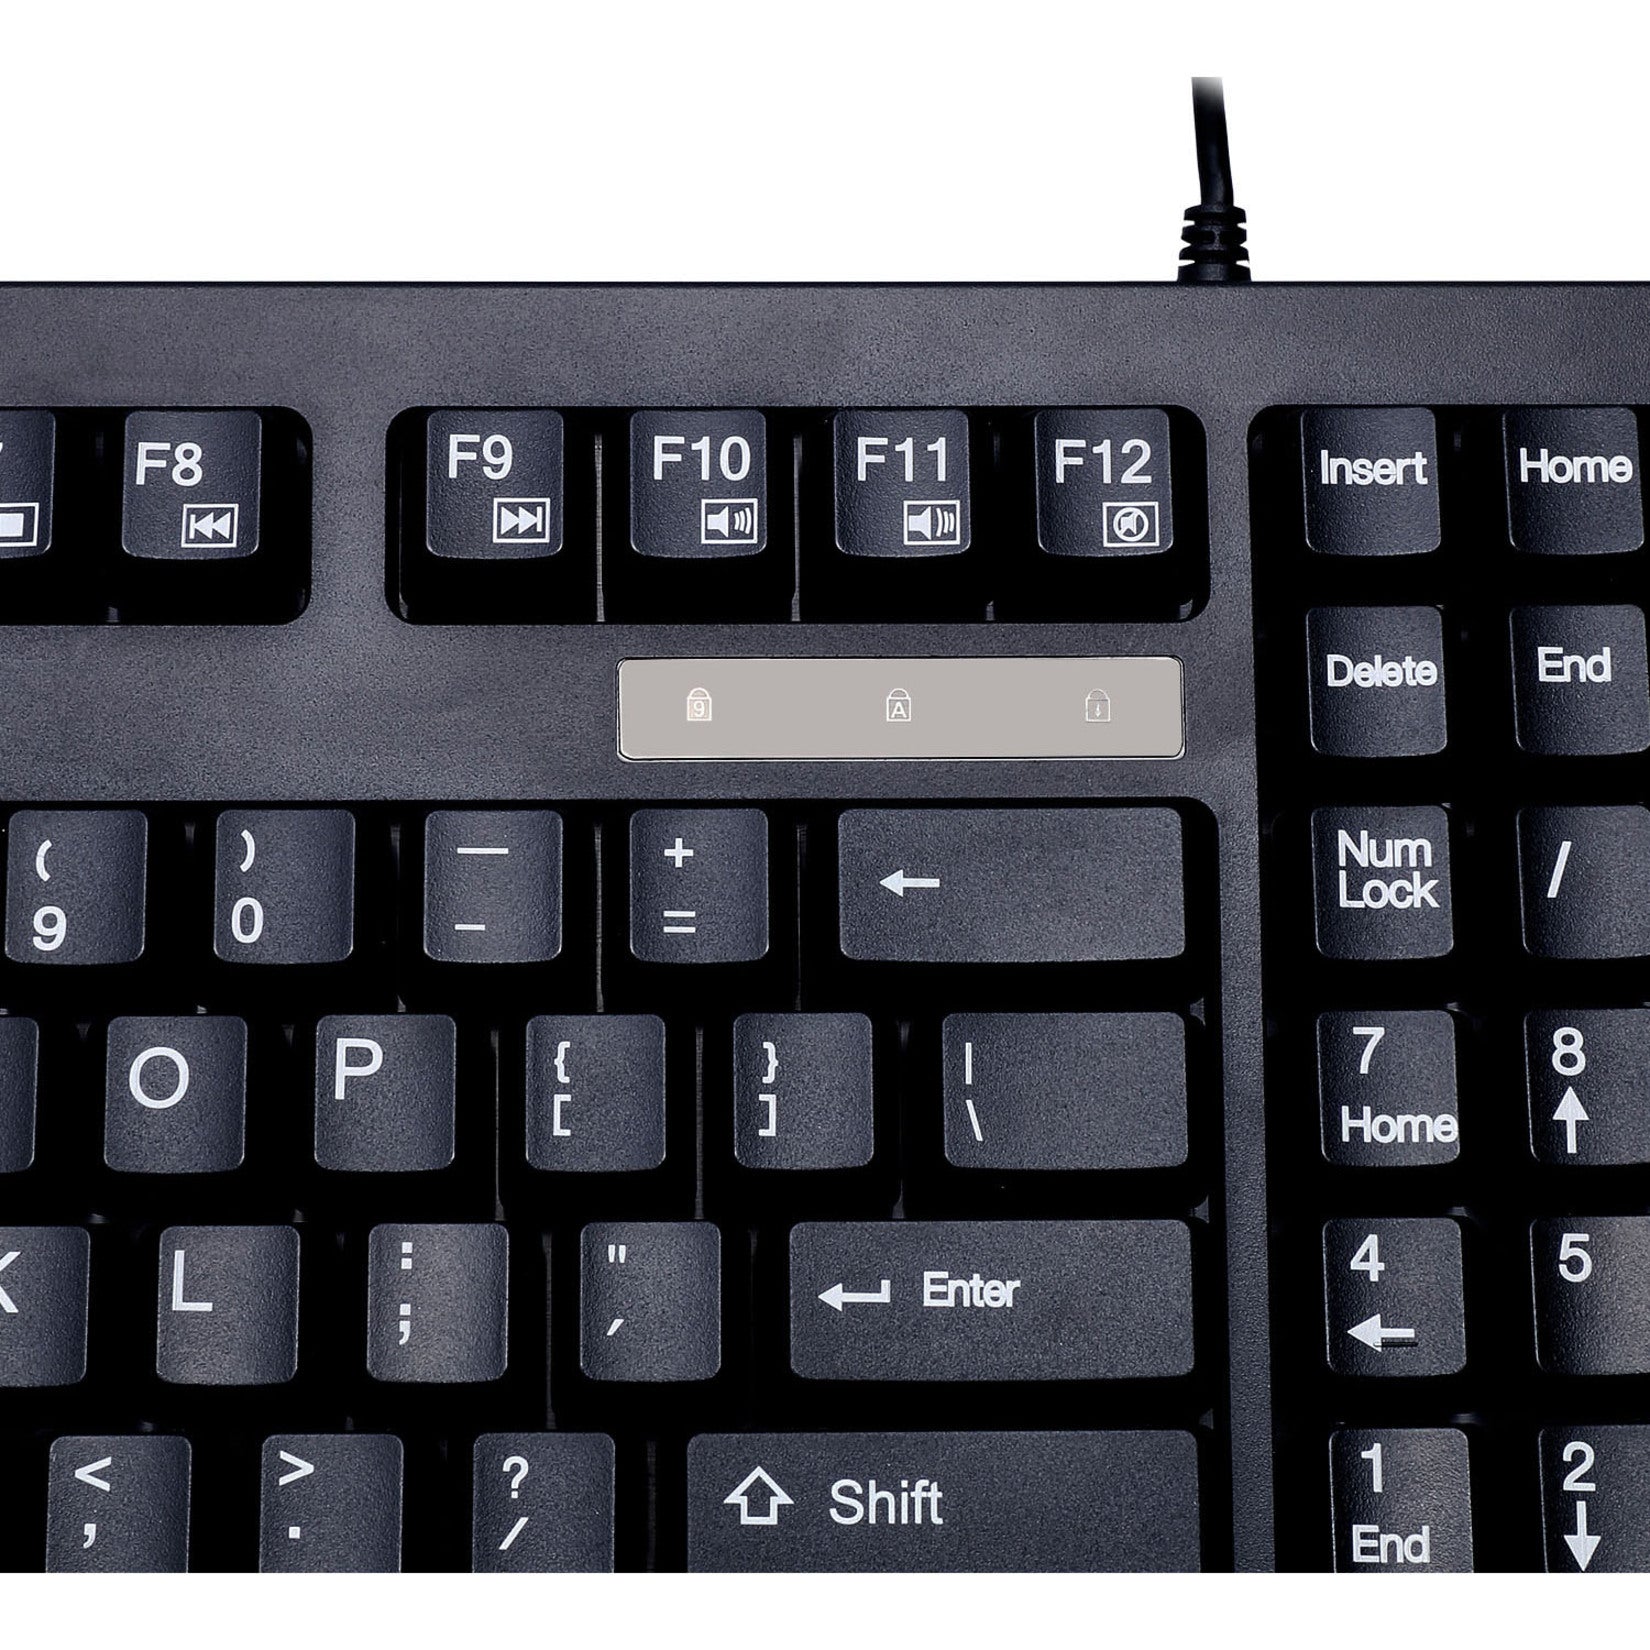 Adesso AKB-425UB-MRP Easy Touch Touchpad Keyboard with Rackmount, USB Cable, Quiet Keys, Compact Keyboard